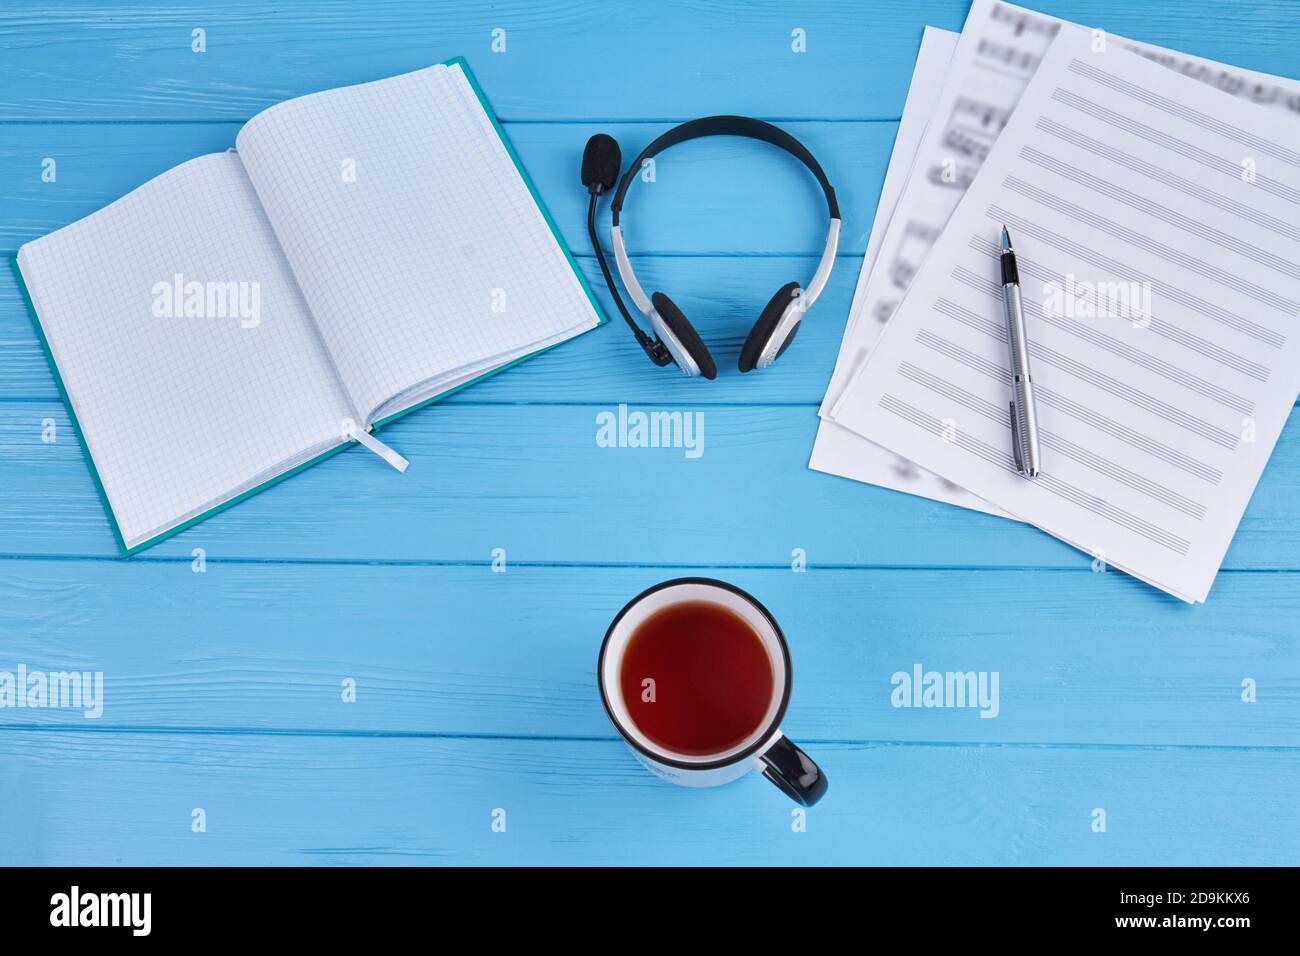 Songwriters workdesk with cup of tea. Stock Photo